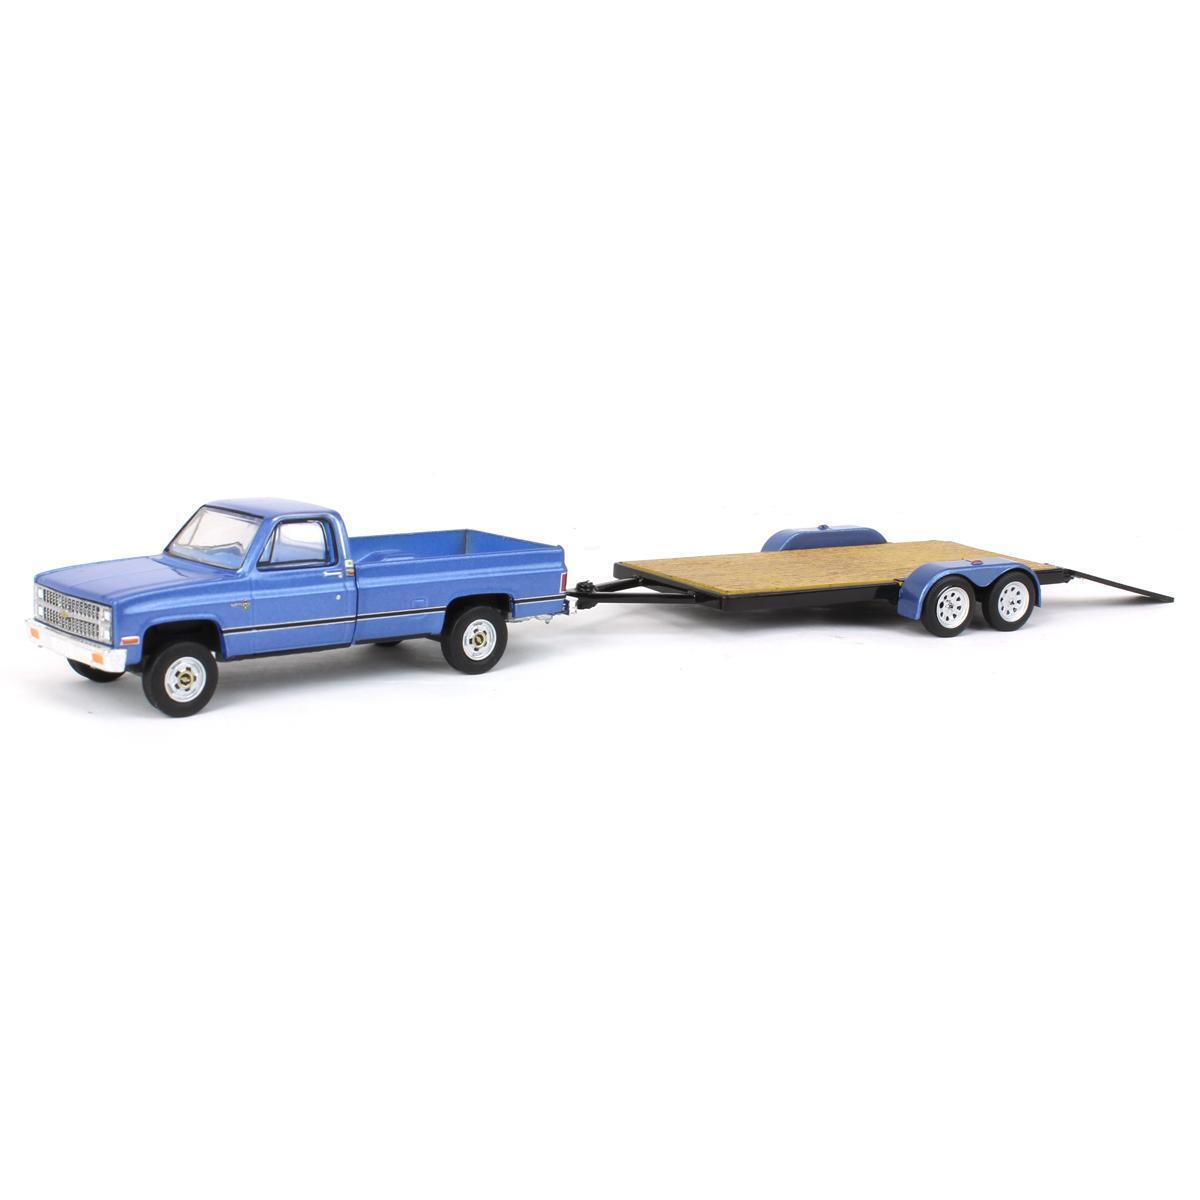 1/64 1981 Chevrolet C-20 Trailering Special with Flatbed Trailer, Hitch & Tow